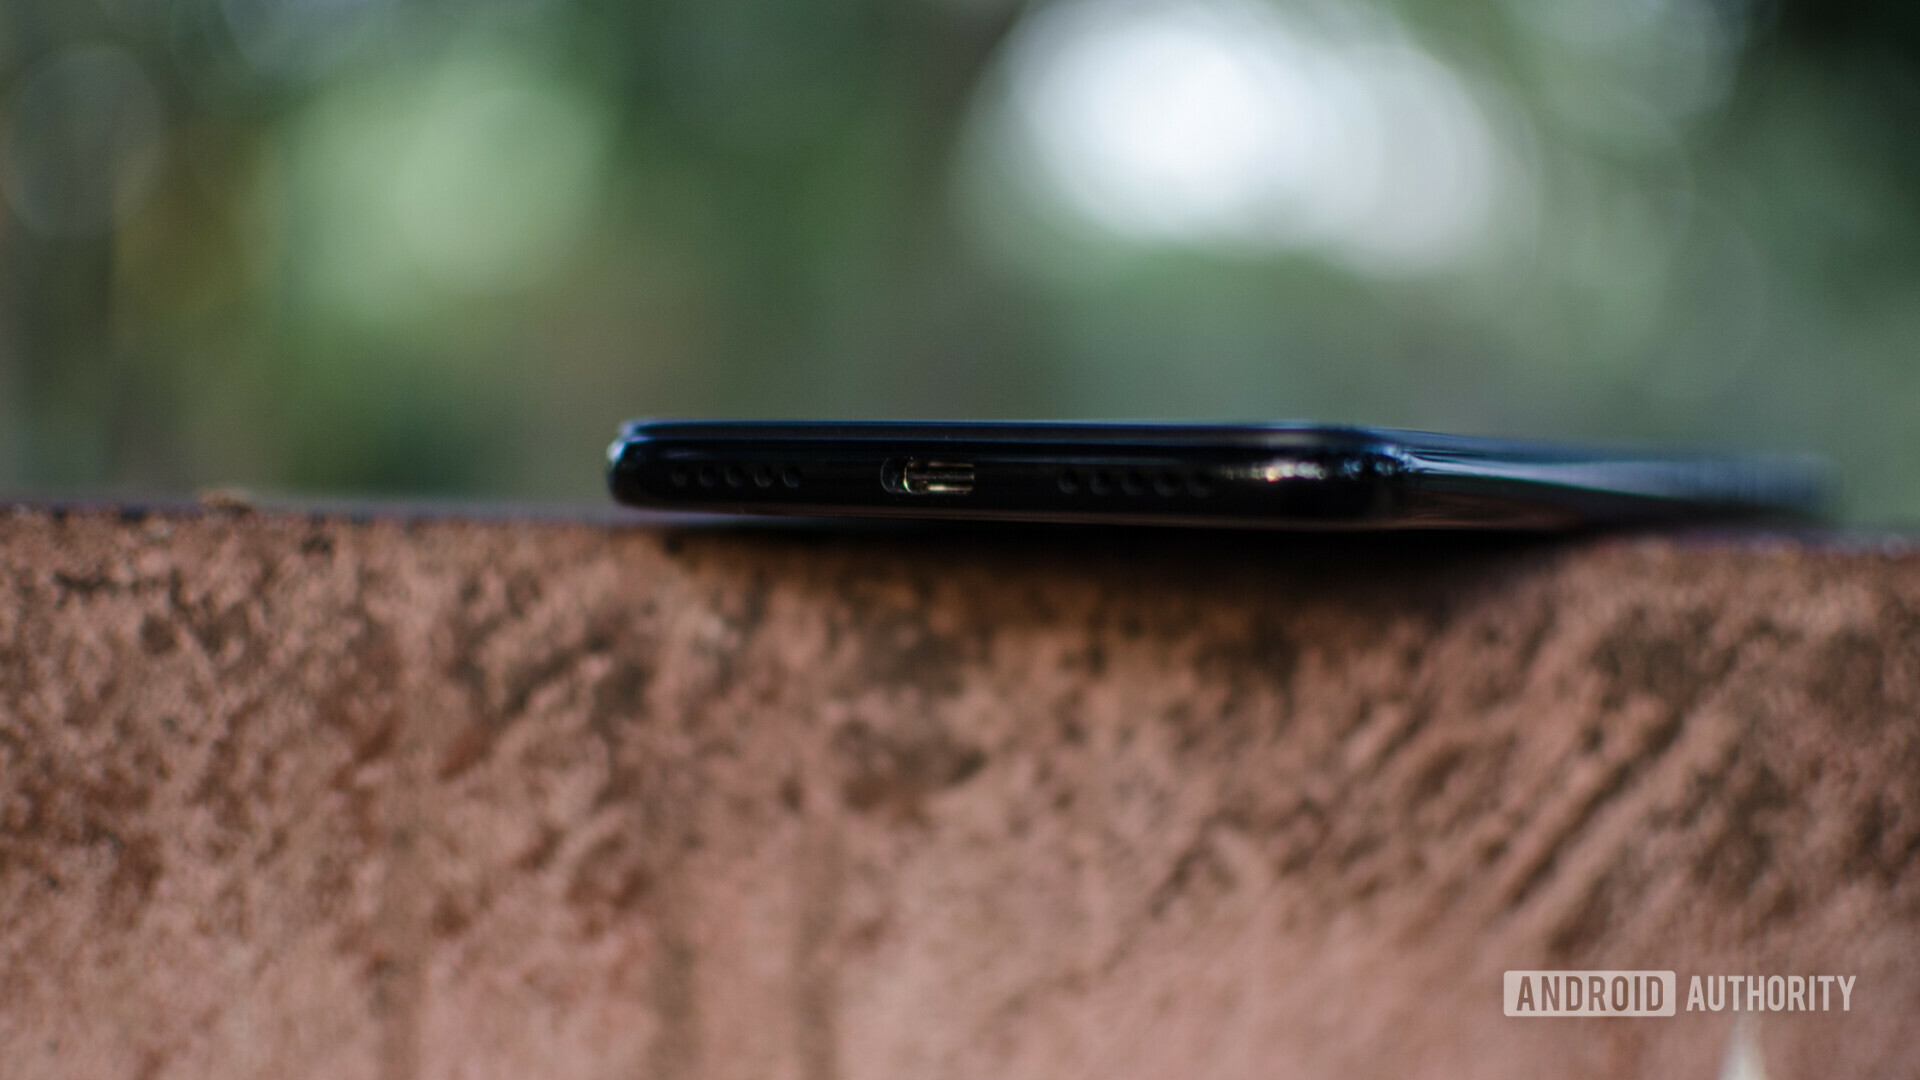 Bottom side of the Redmi Note 7 Pro focusing on the USB Type-C port and speaker grill.